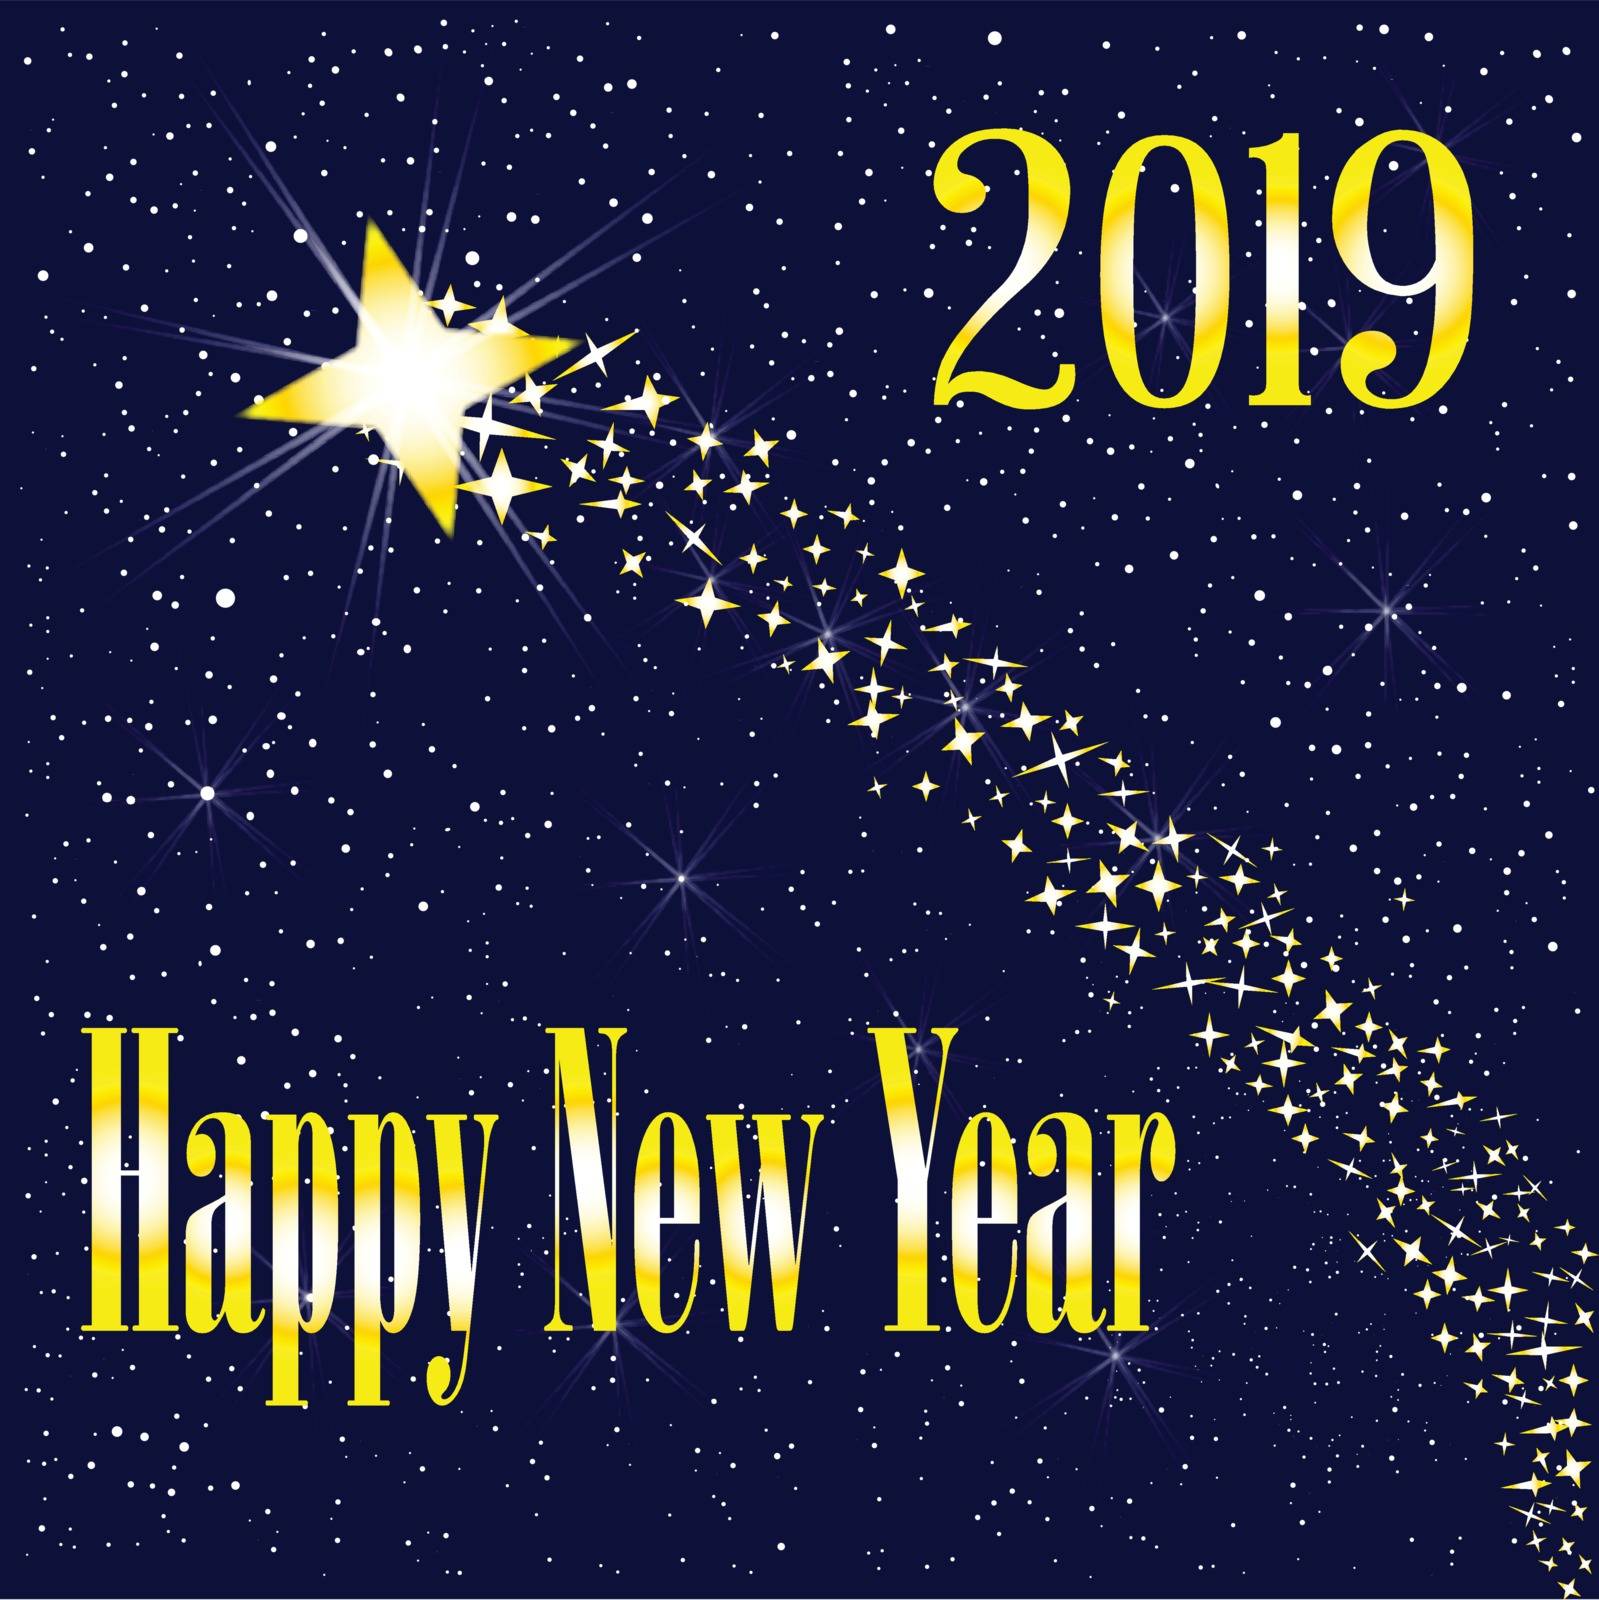 A rising star introducing a happy new year 2019